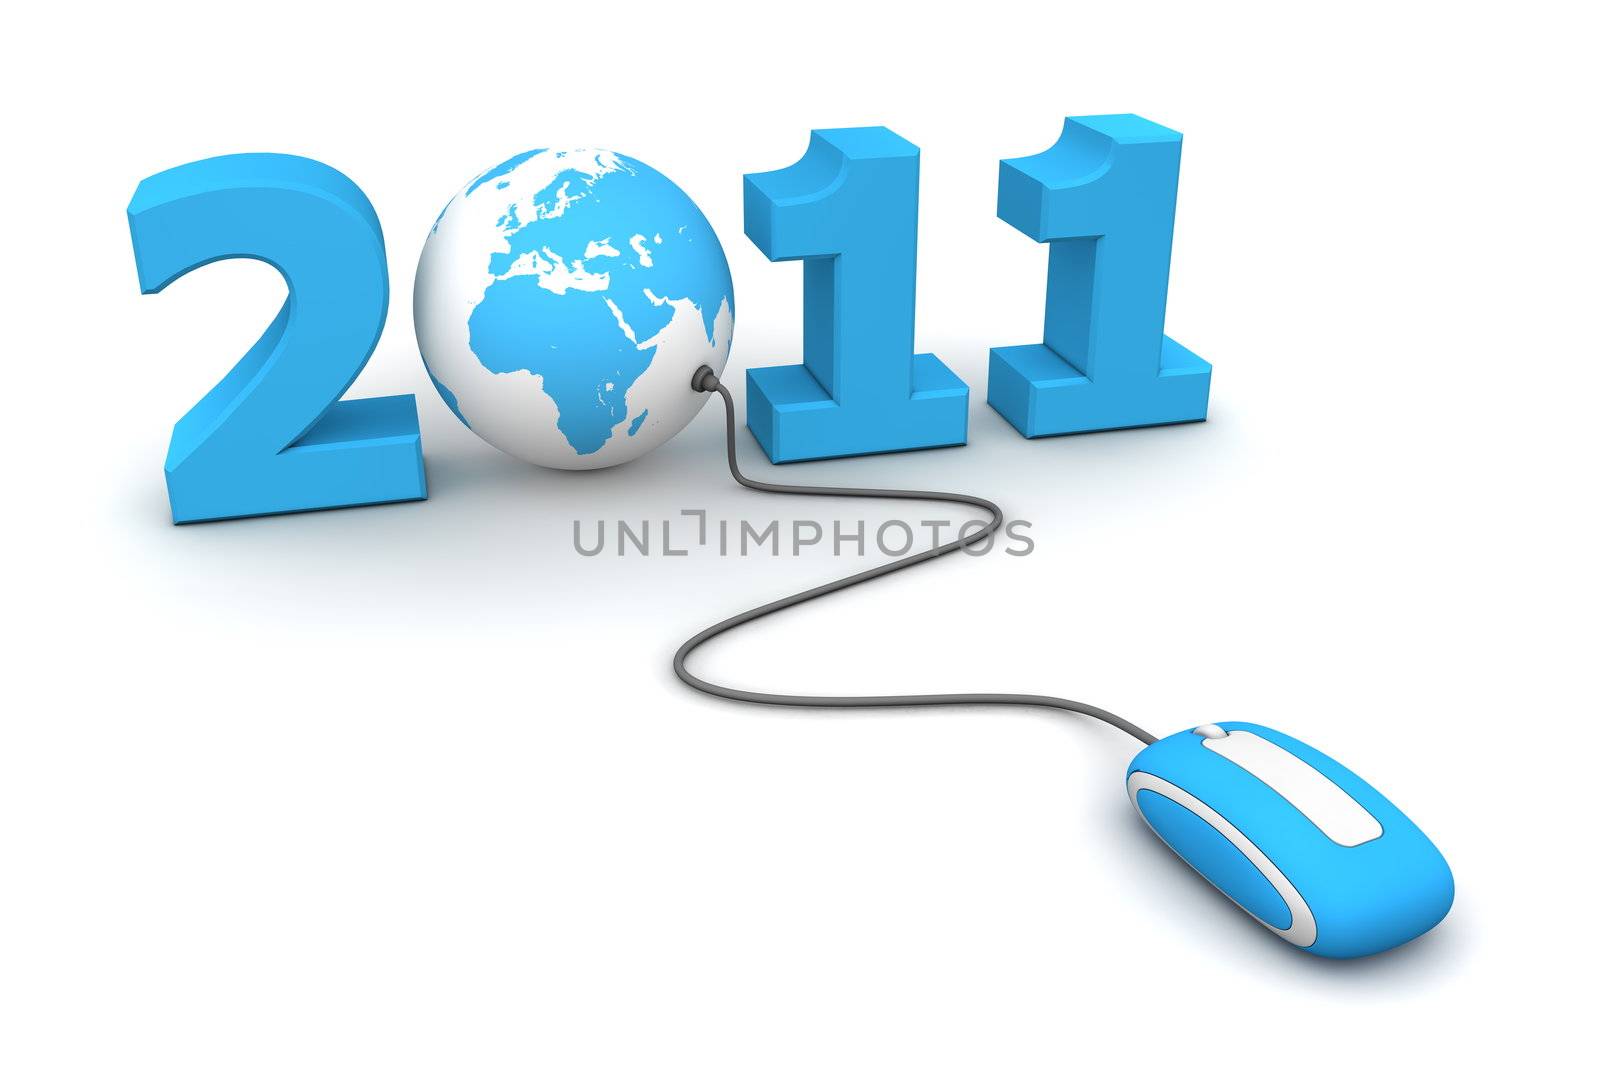 modern blue computer mouse connected to the blue date 2011 and a globe replaces number 0 - welcome the new year